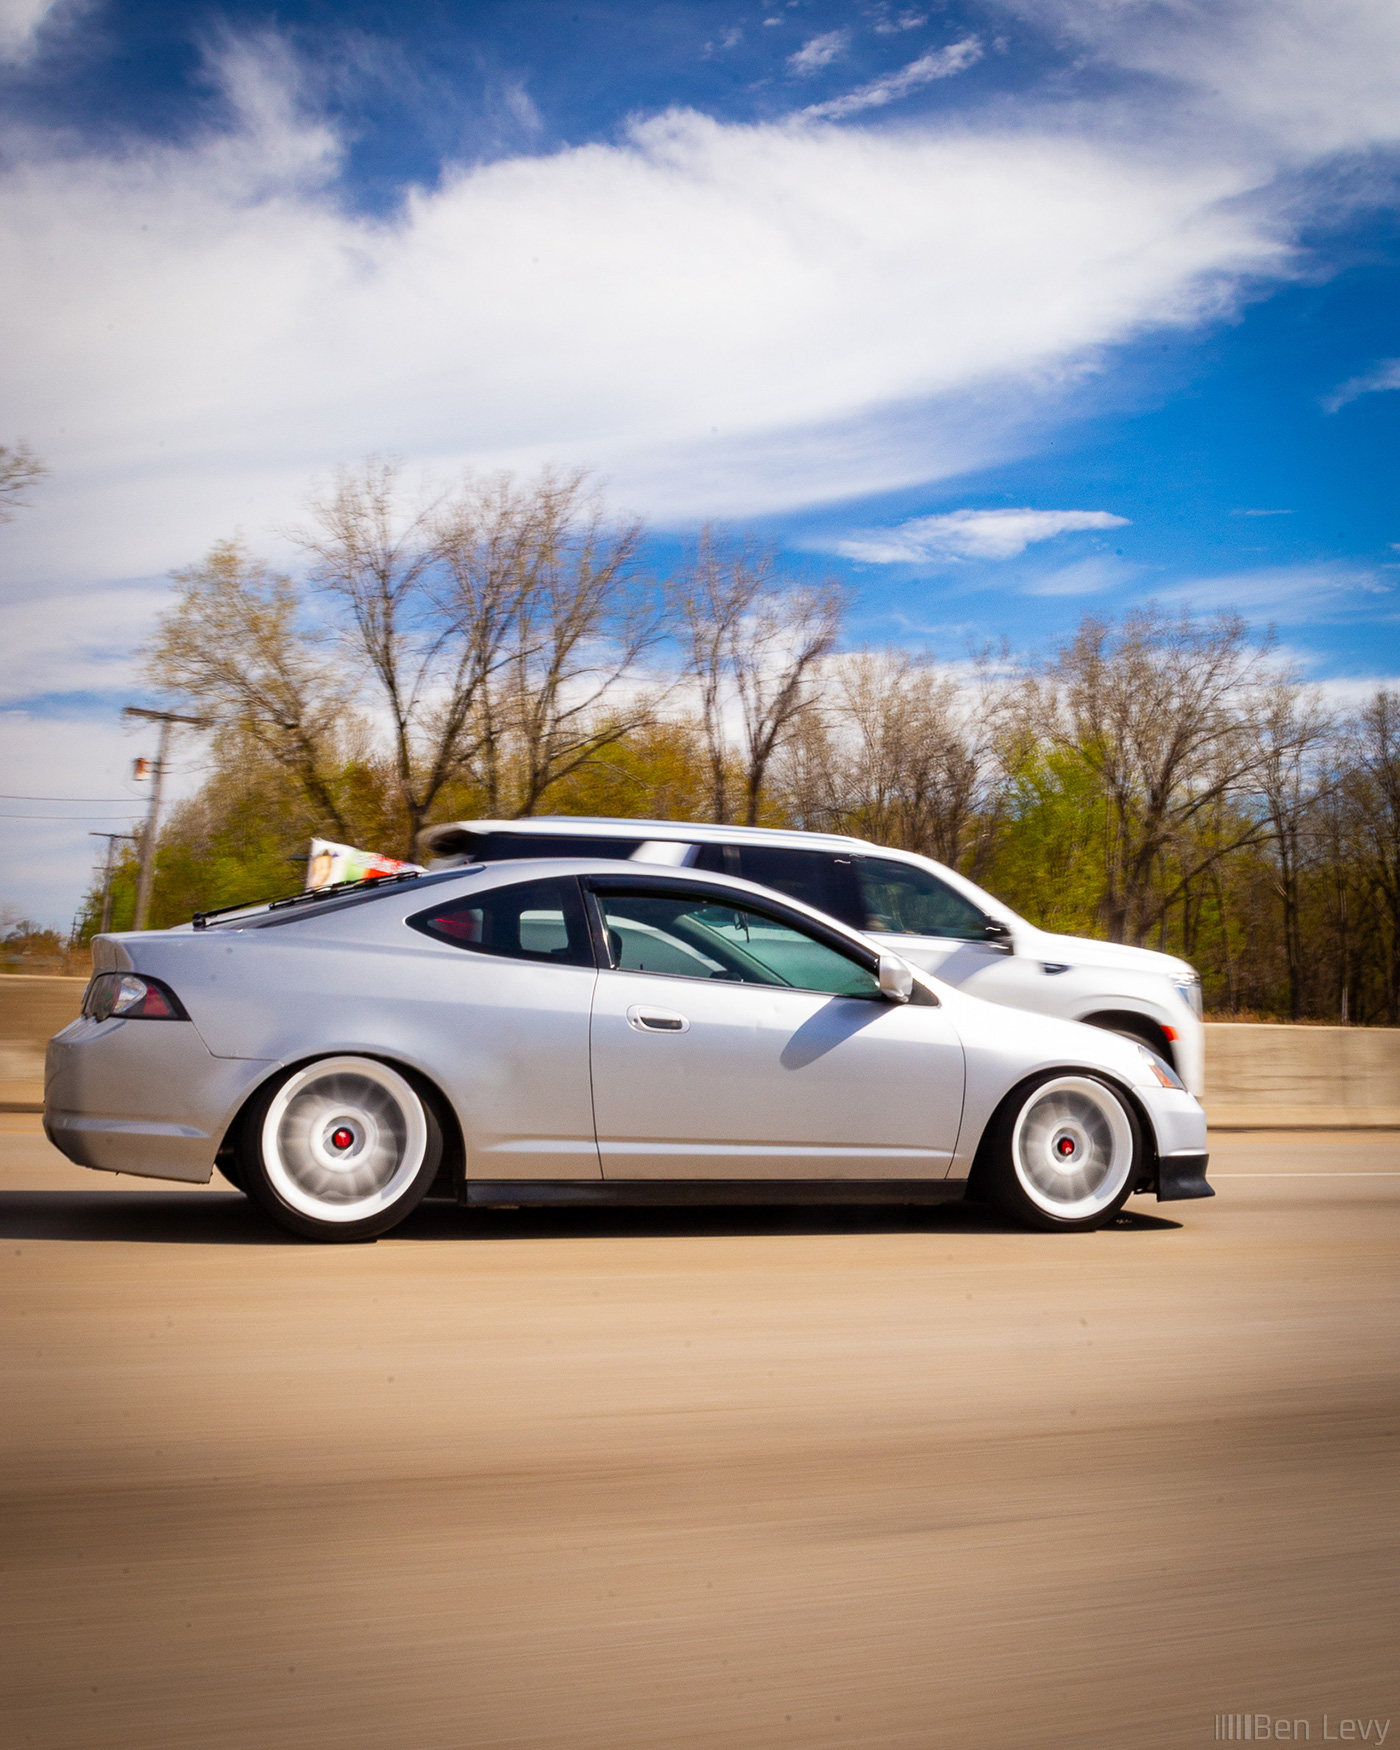 Rolling Shot of Silver Acura RSX